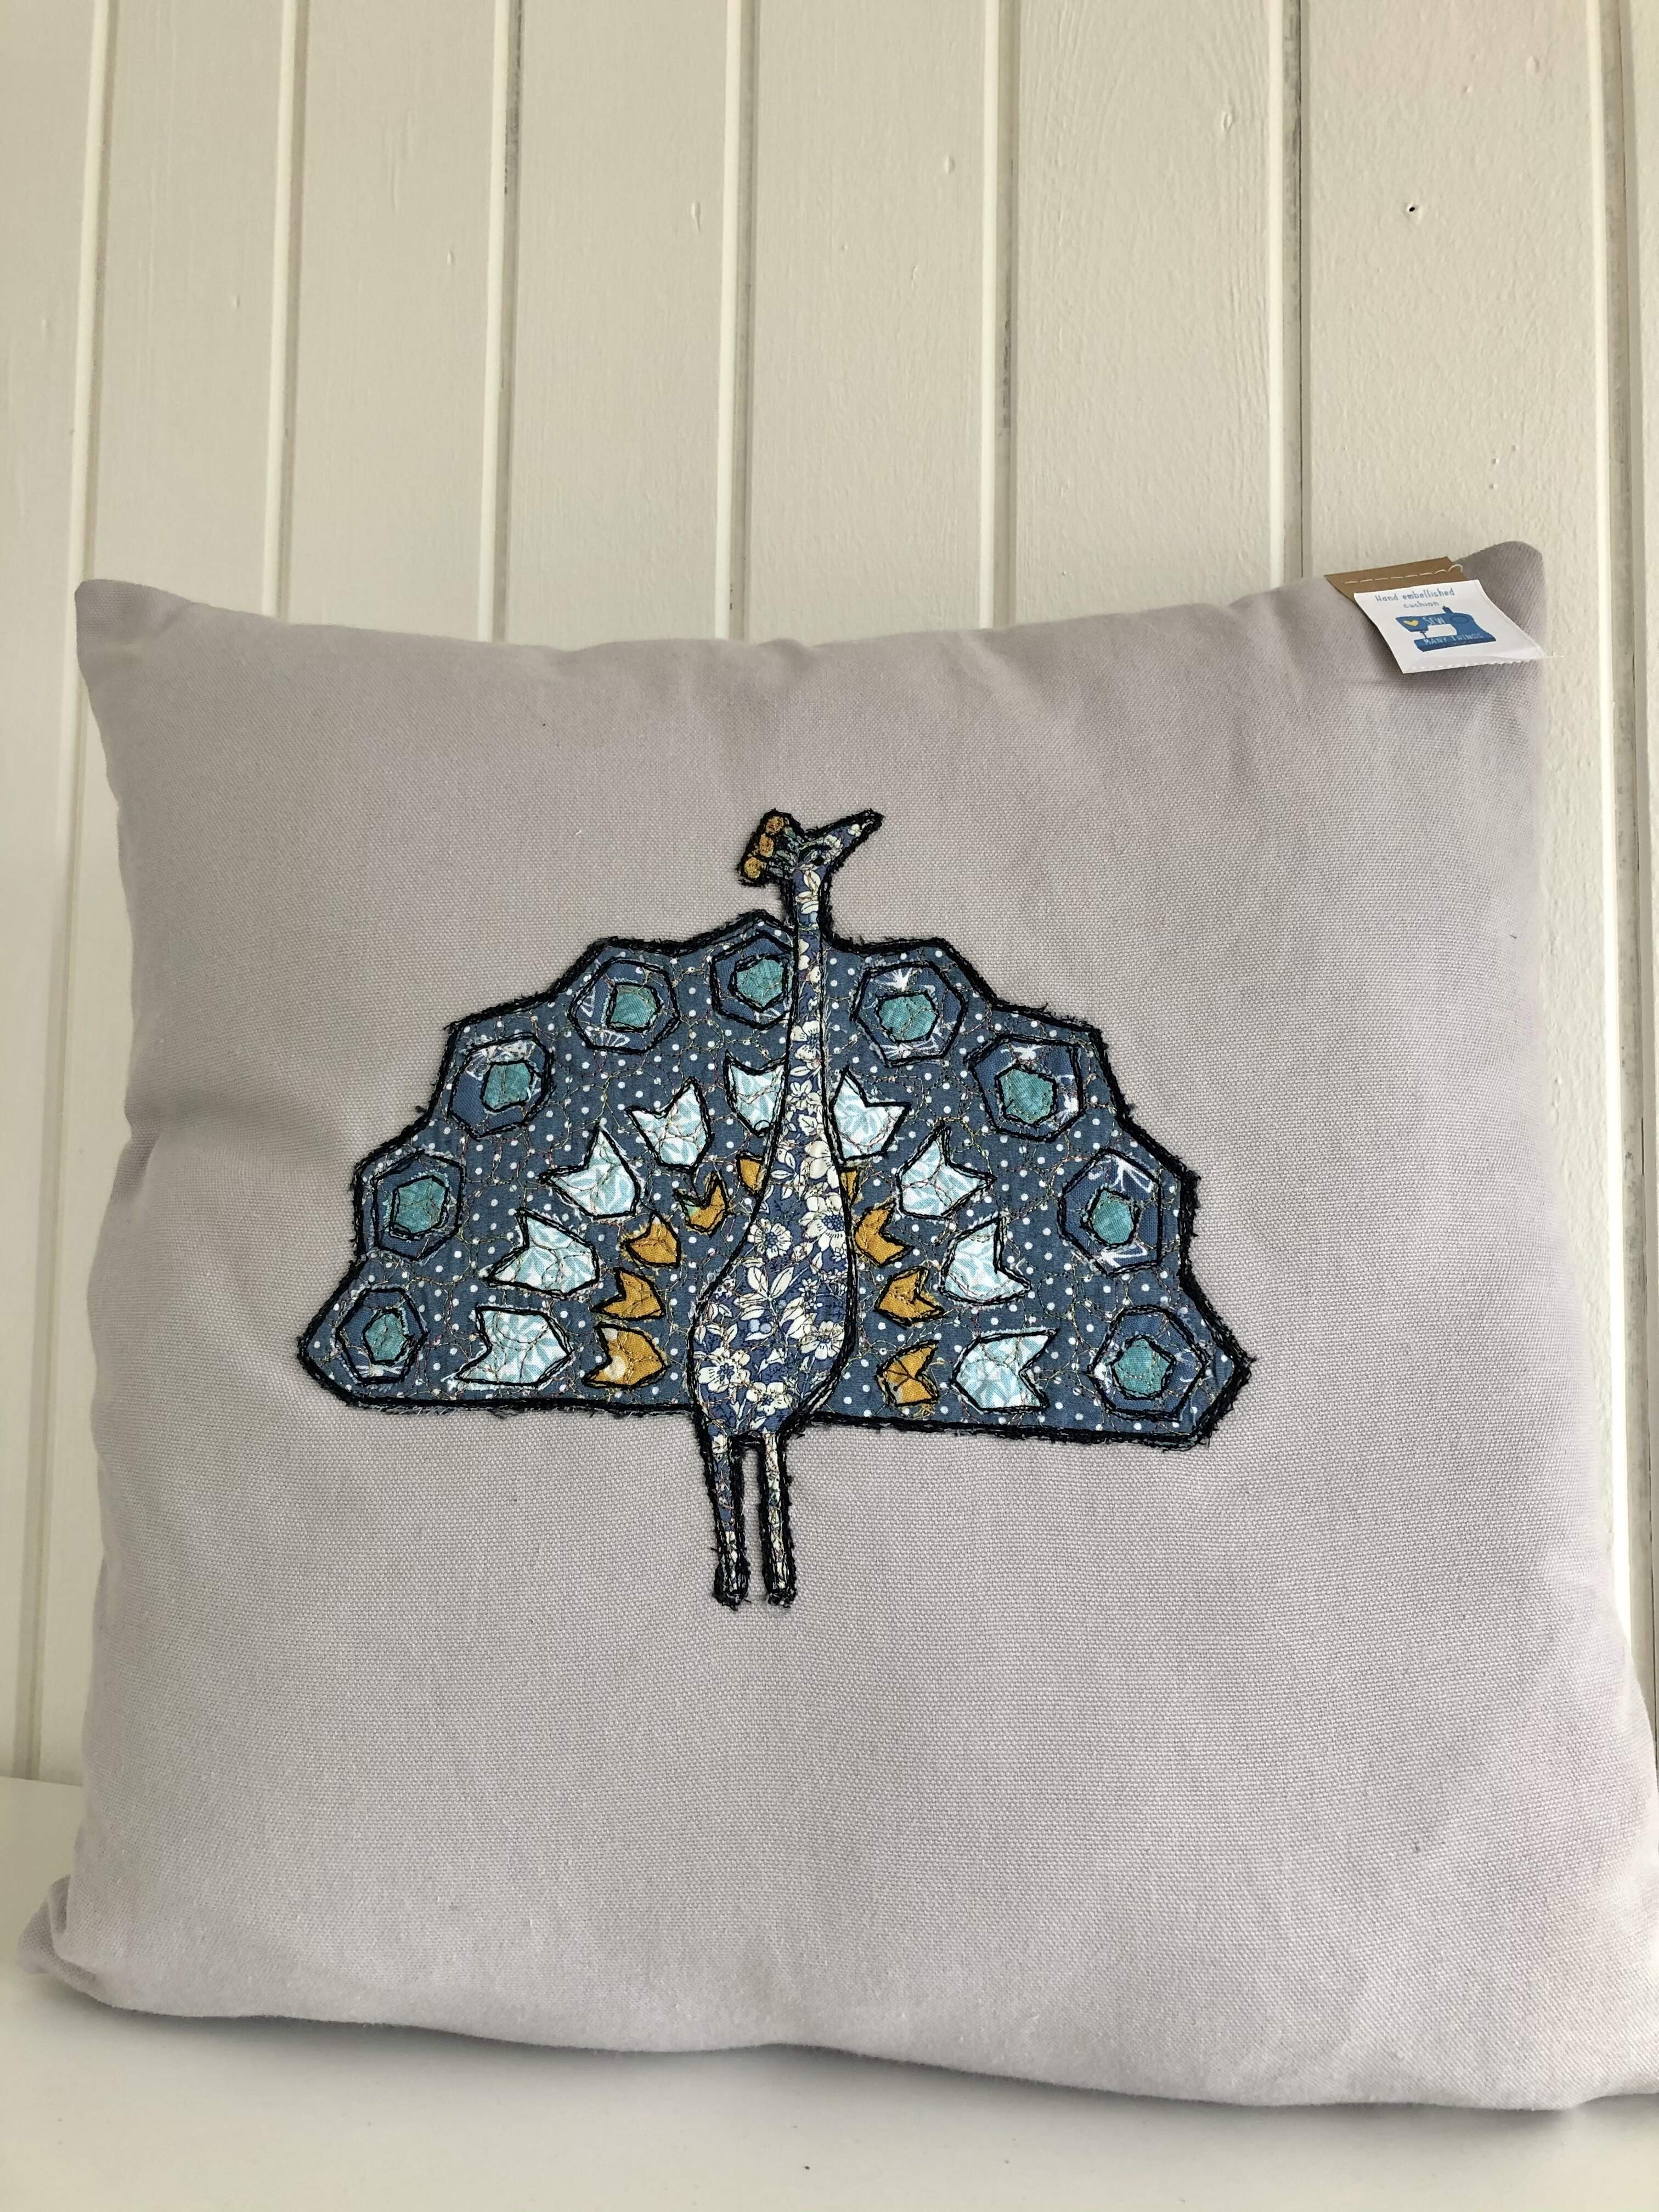 Free motion embroidered cushion. Vibrant colours and sparkly thread.